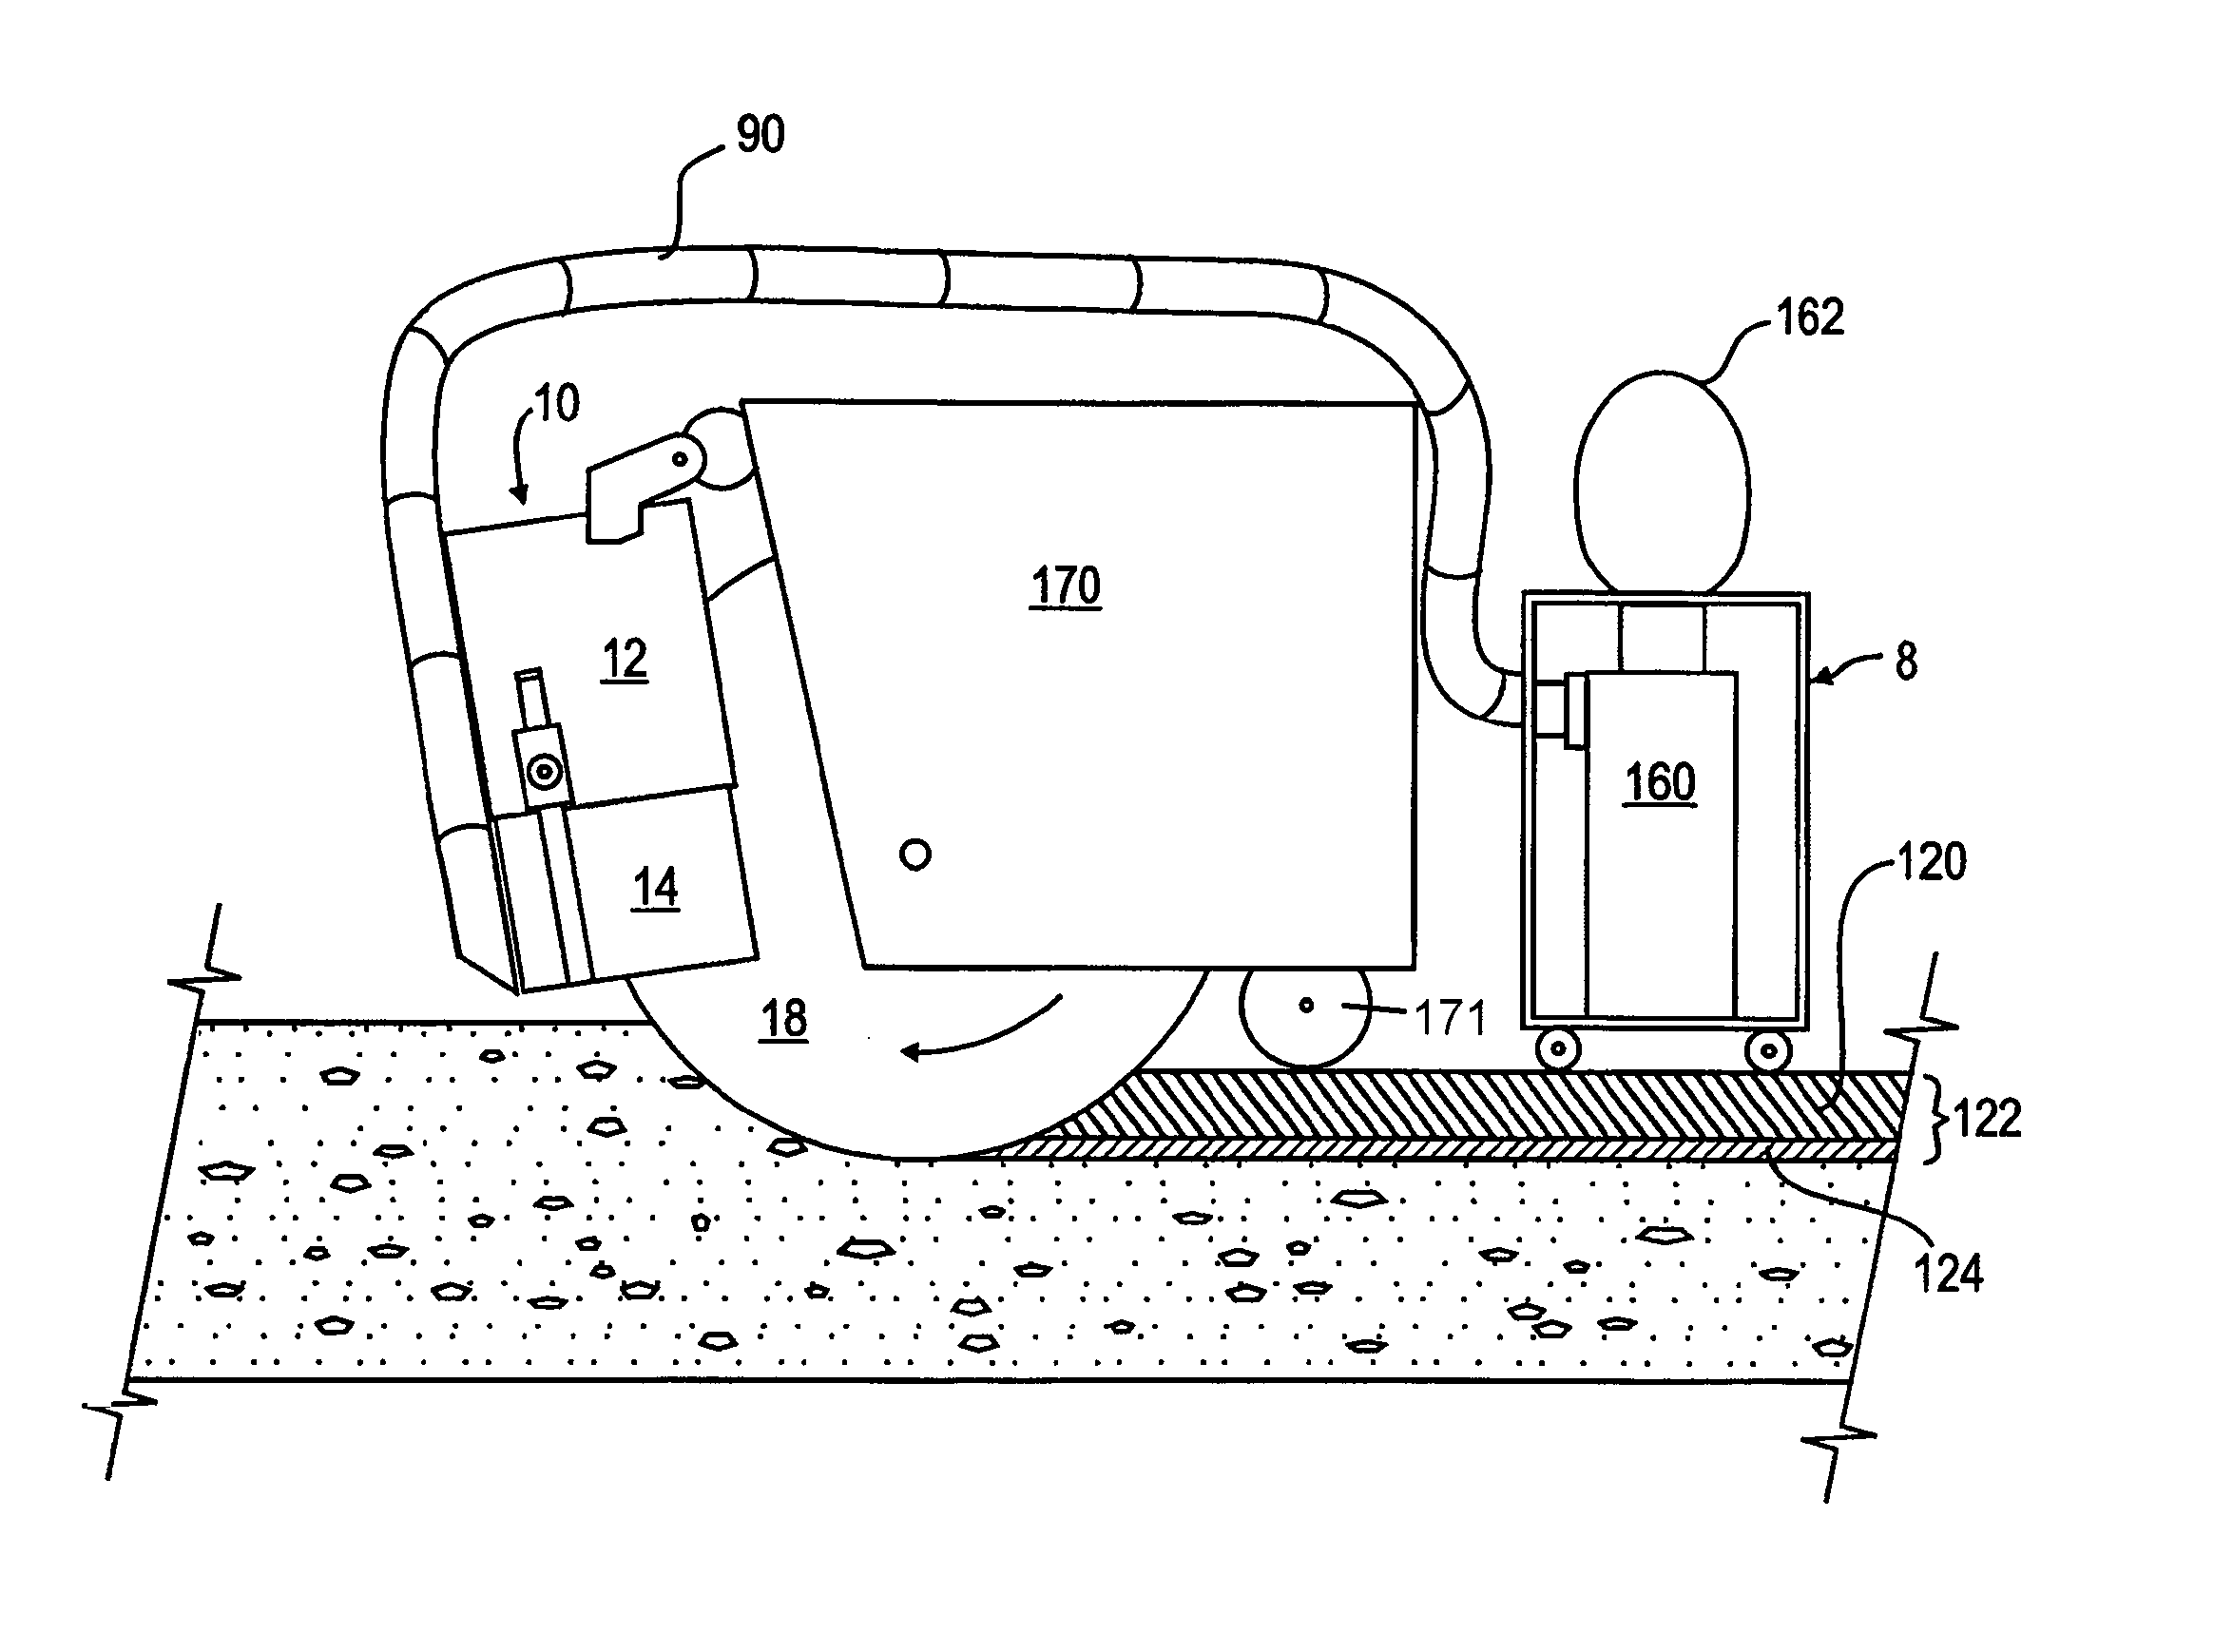 Slab saw with dust collector and method of dry-cutting pavement